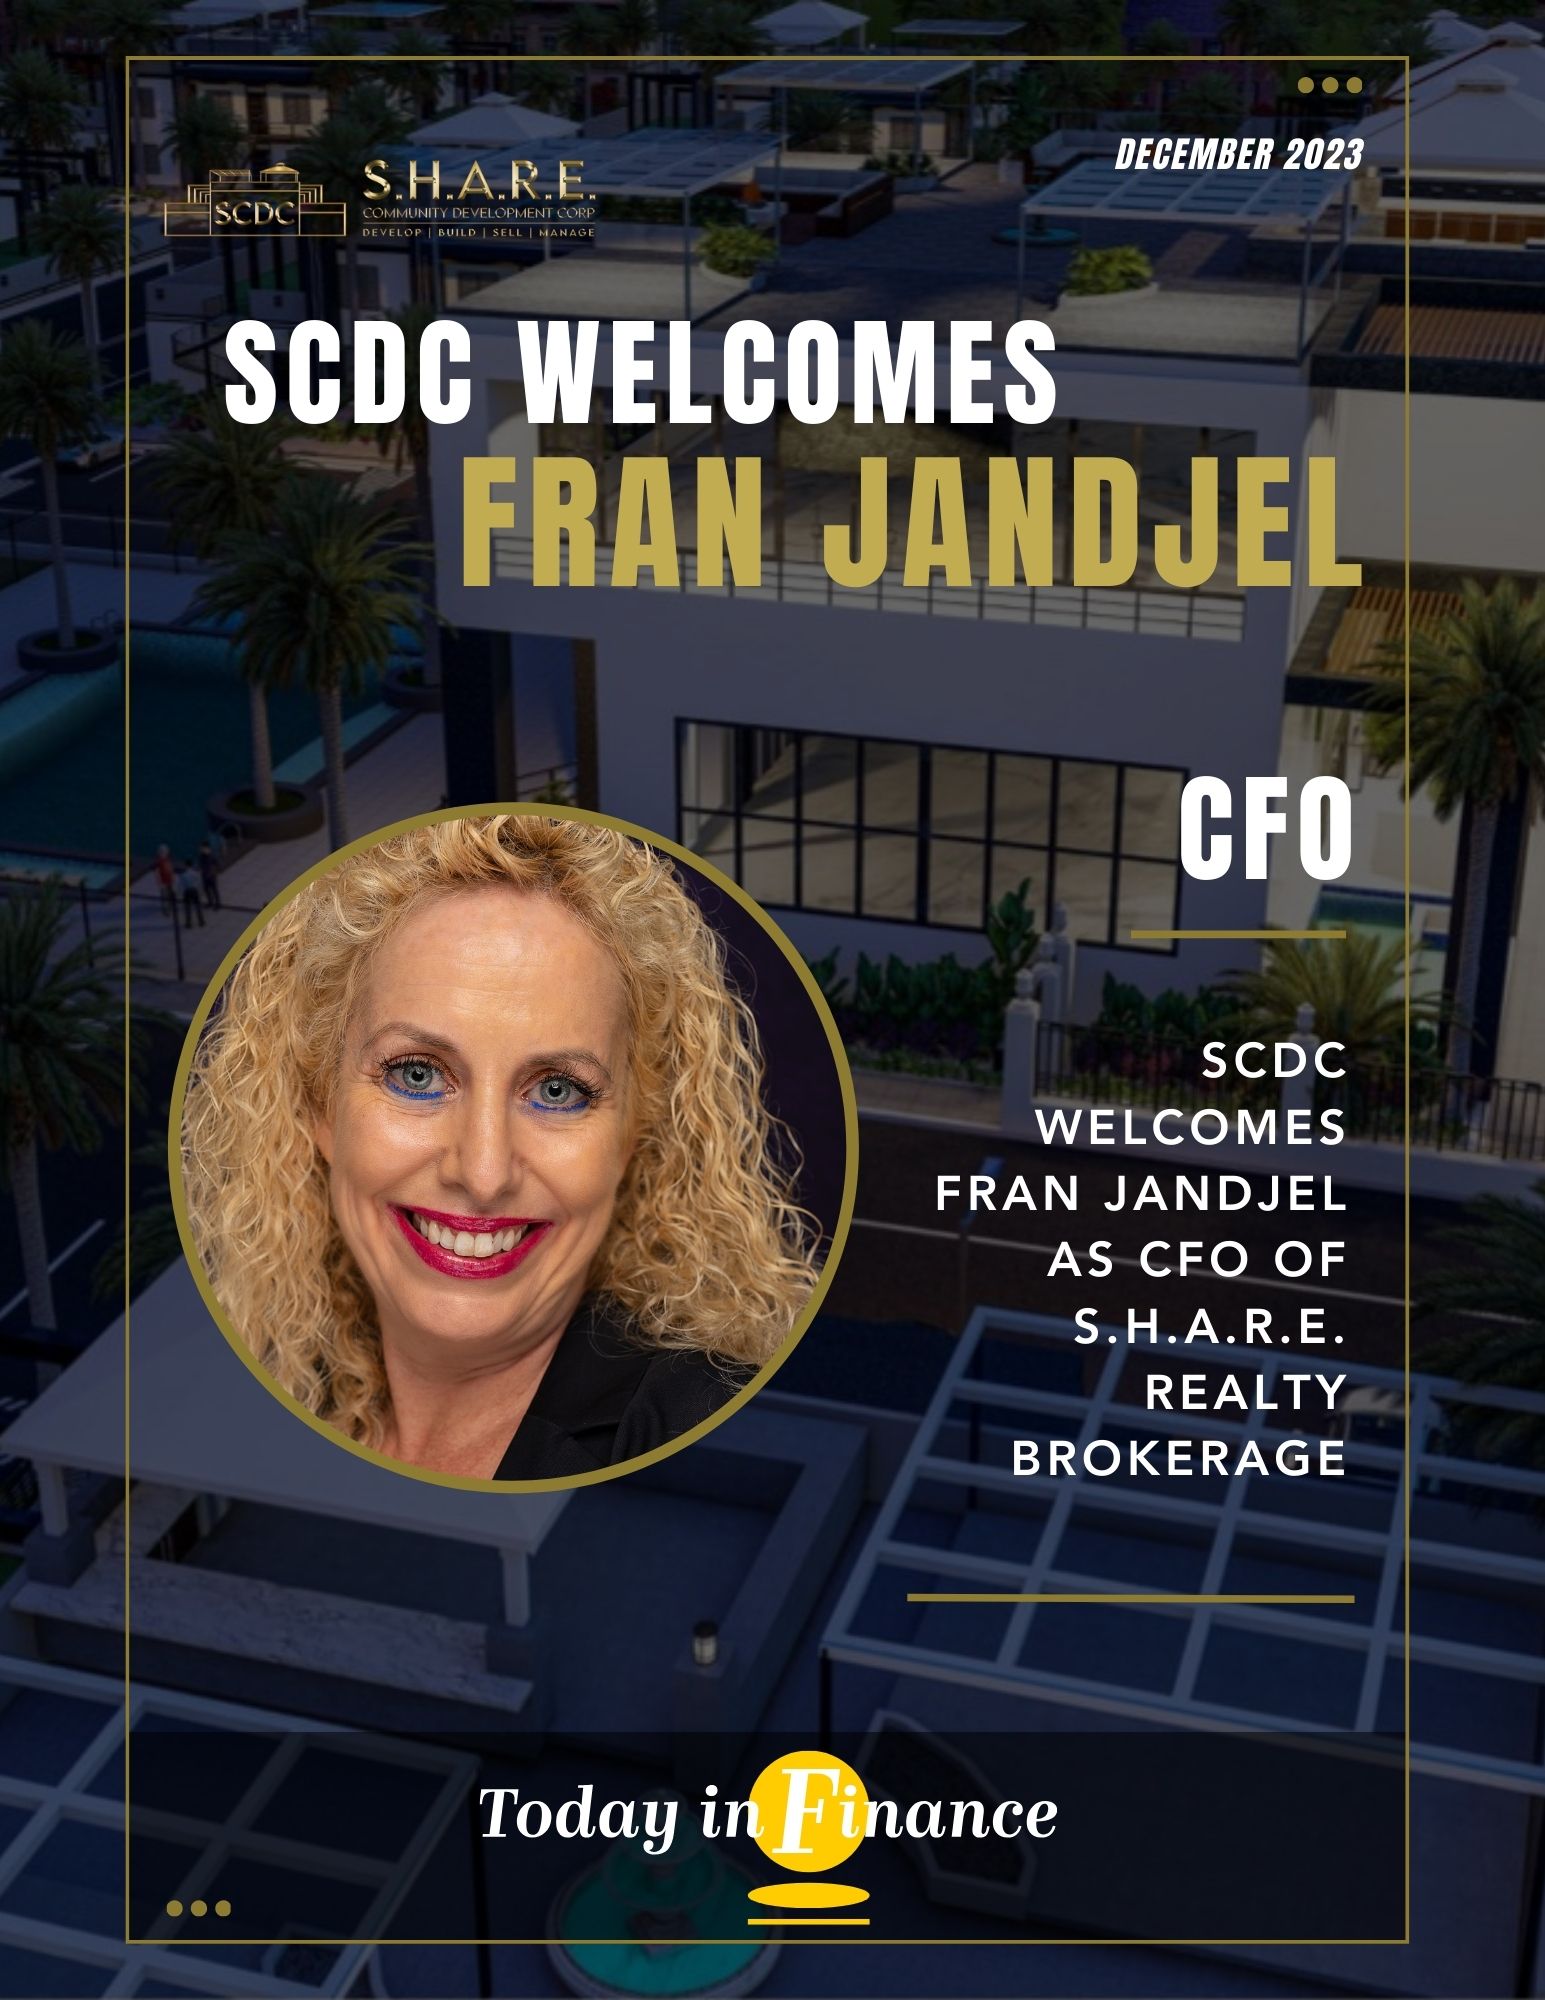 S.H.A.R.E. Staffing & Recruiting, a Subsidiary of SCDC, Welcomes Fran Jandjel as CFO